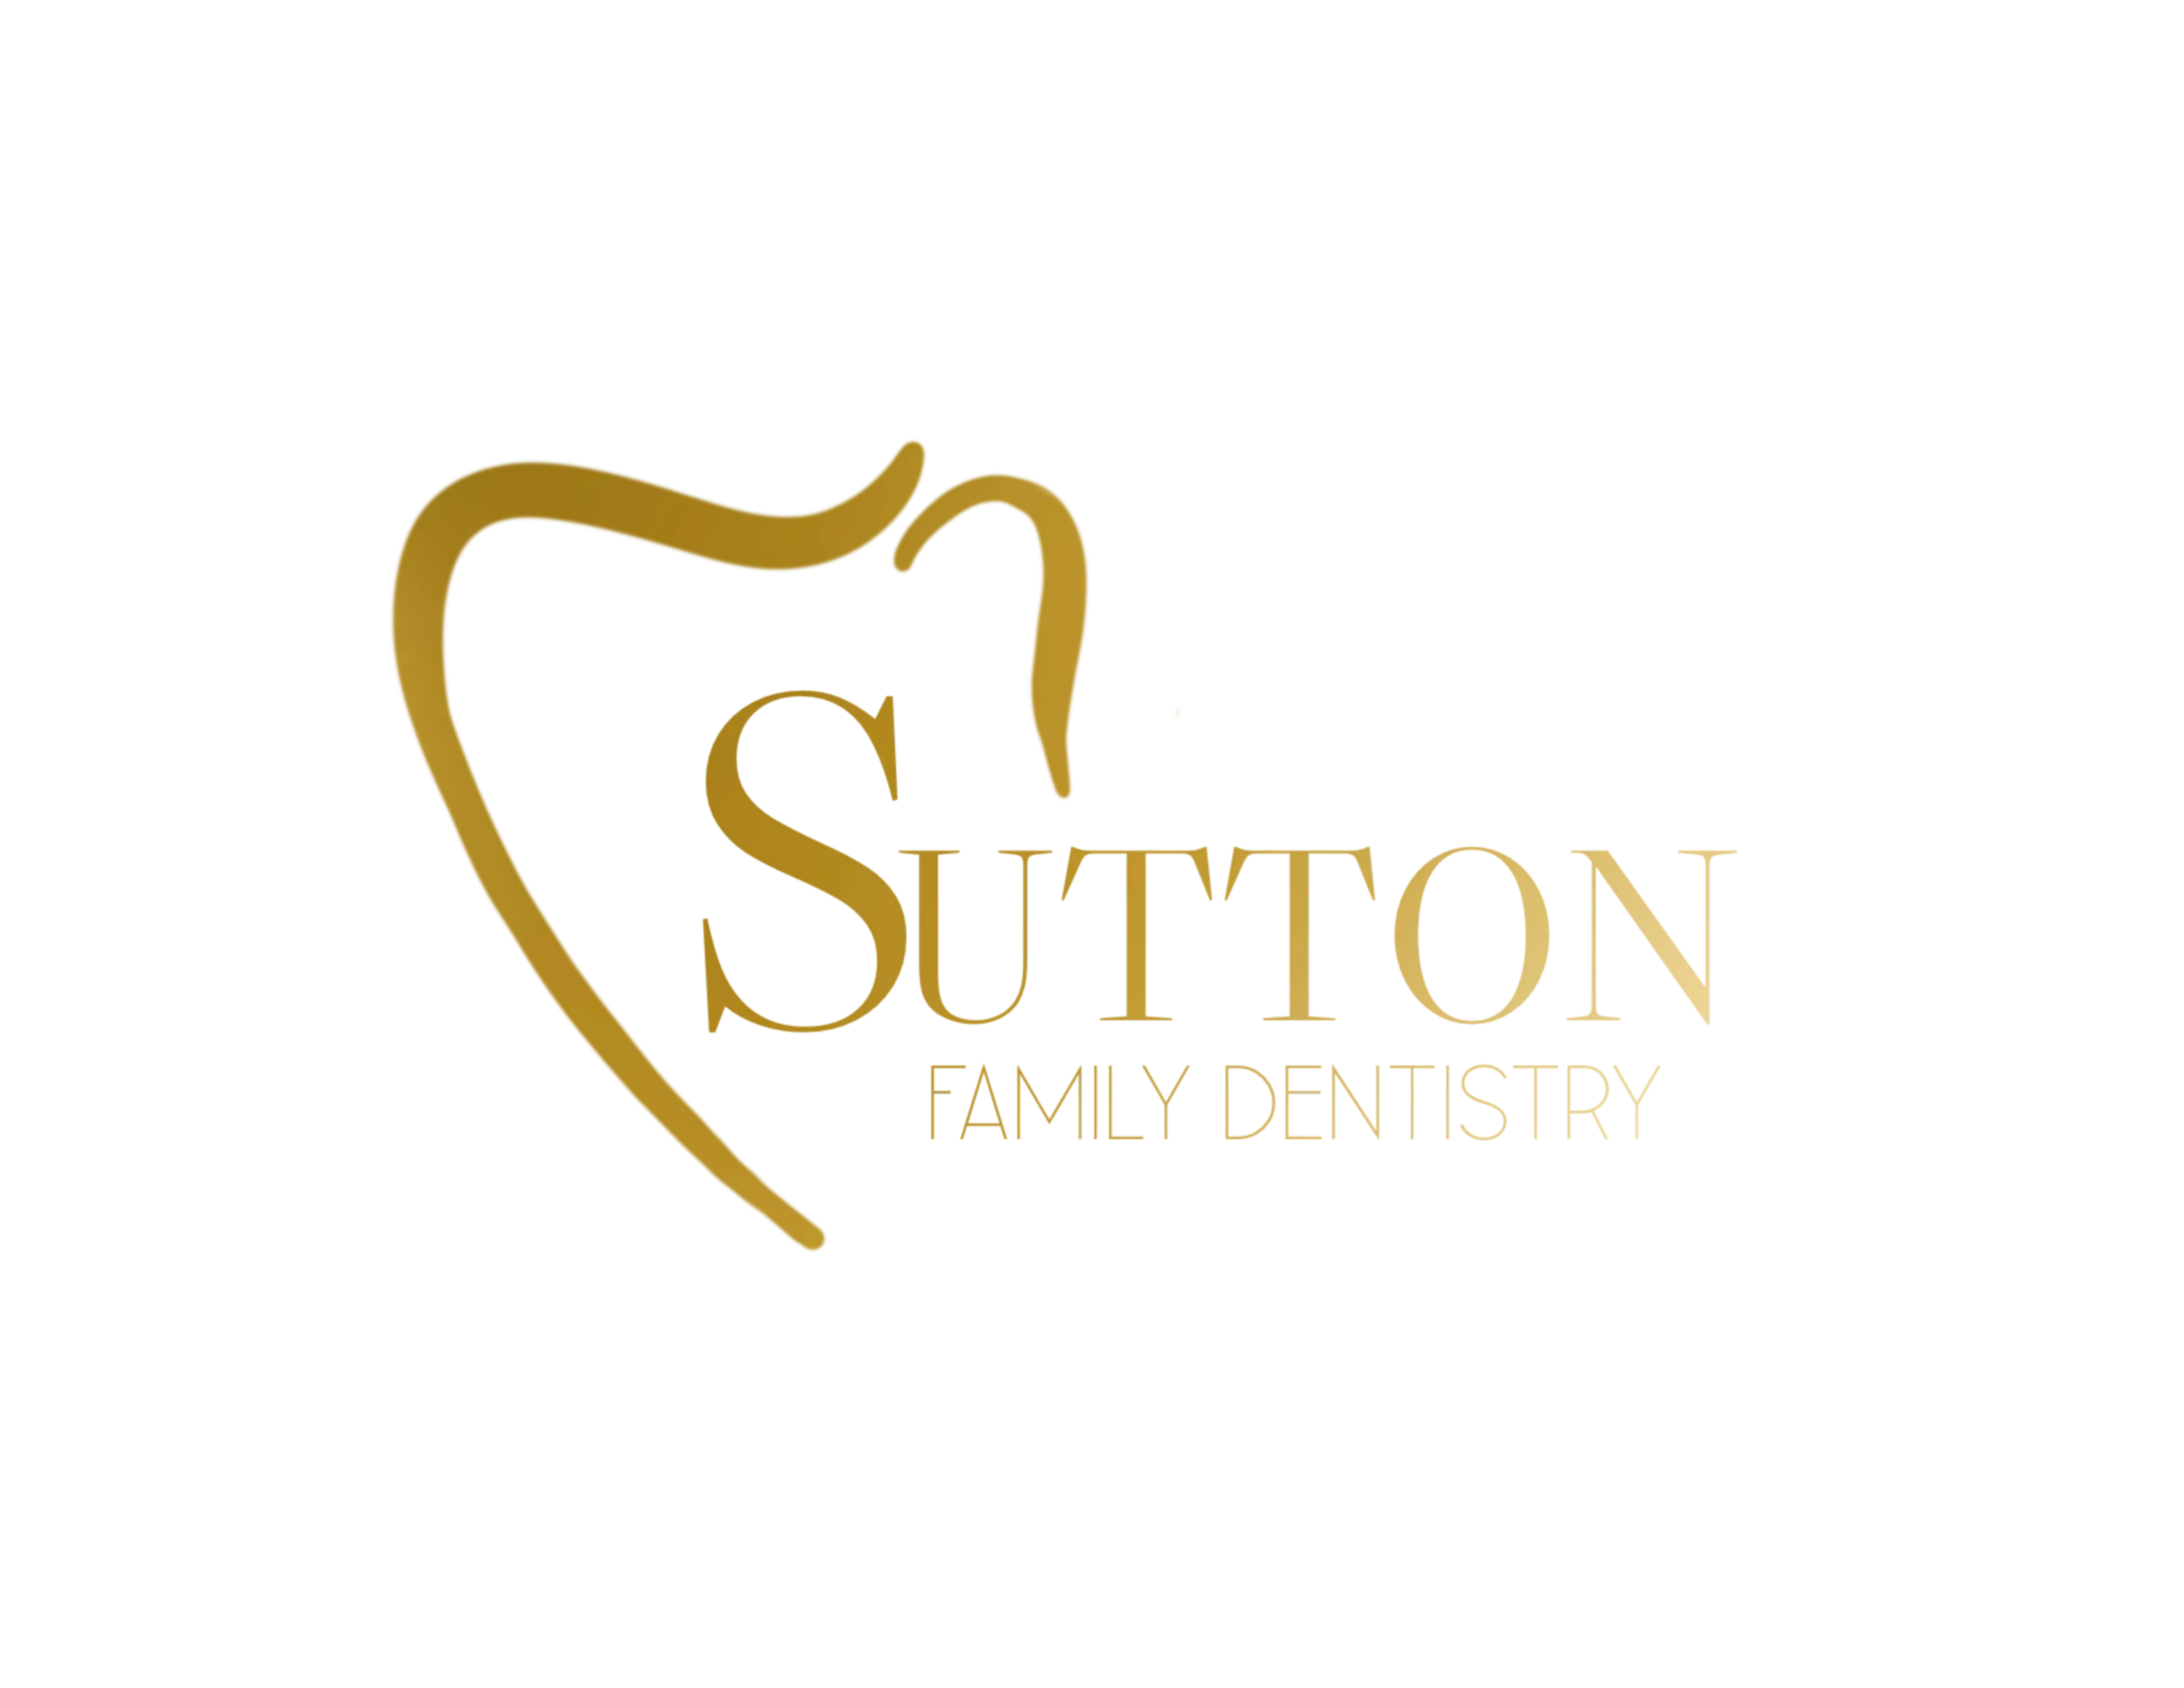 Sutton Family Dentistry